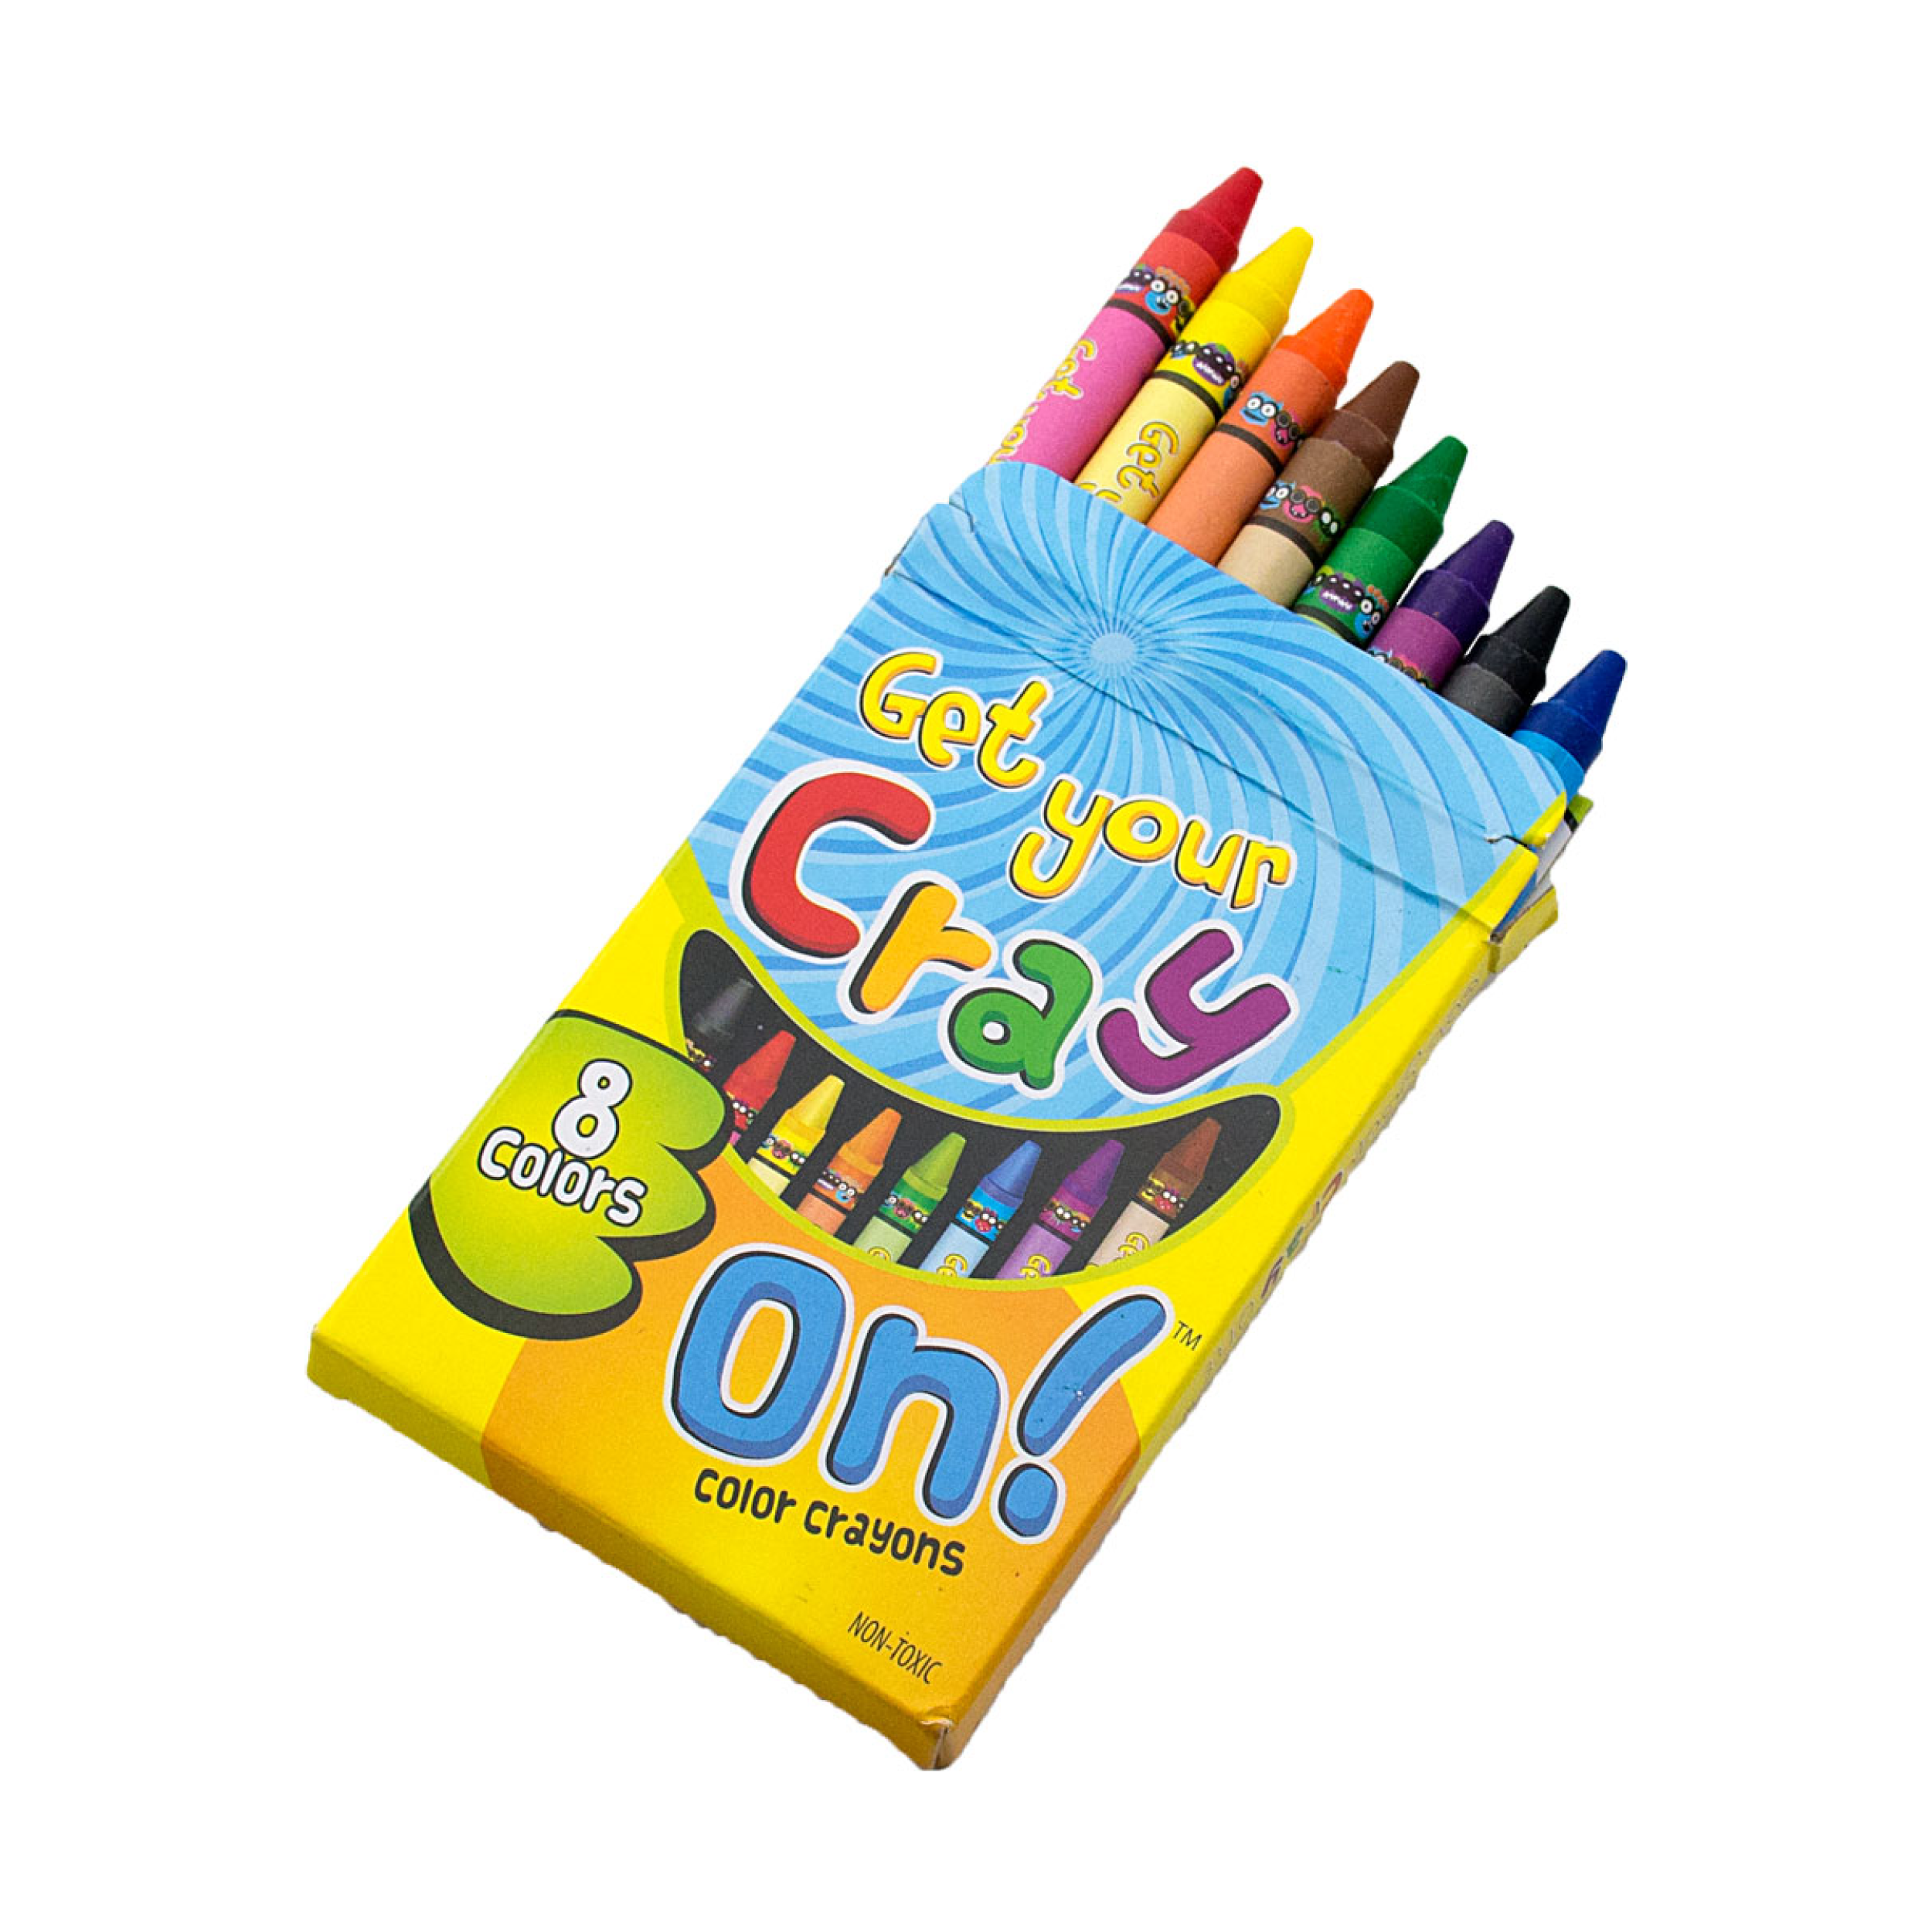 Get Your Cray On!® Crayons - 8 pack